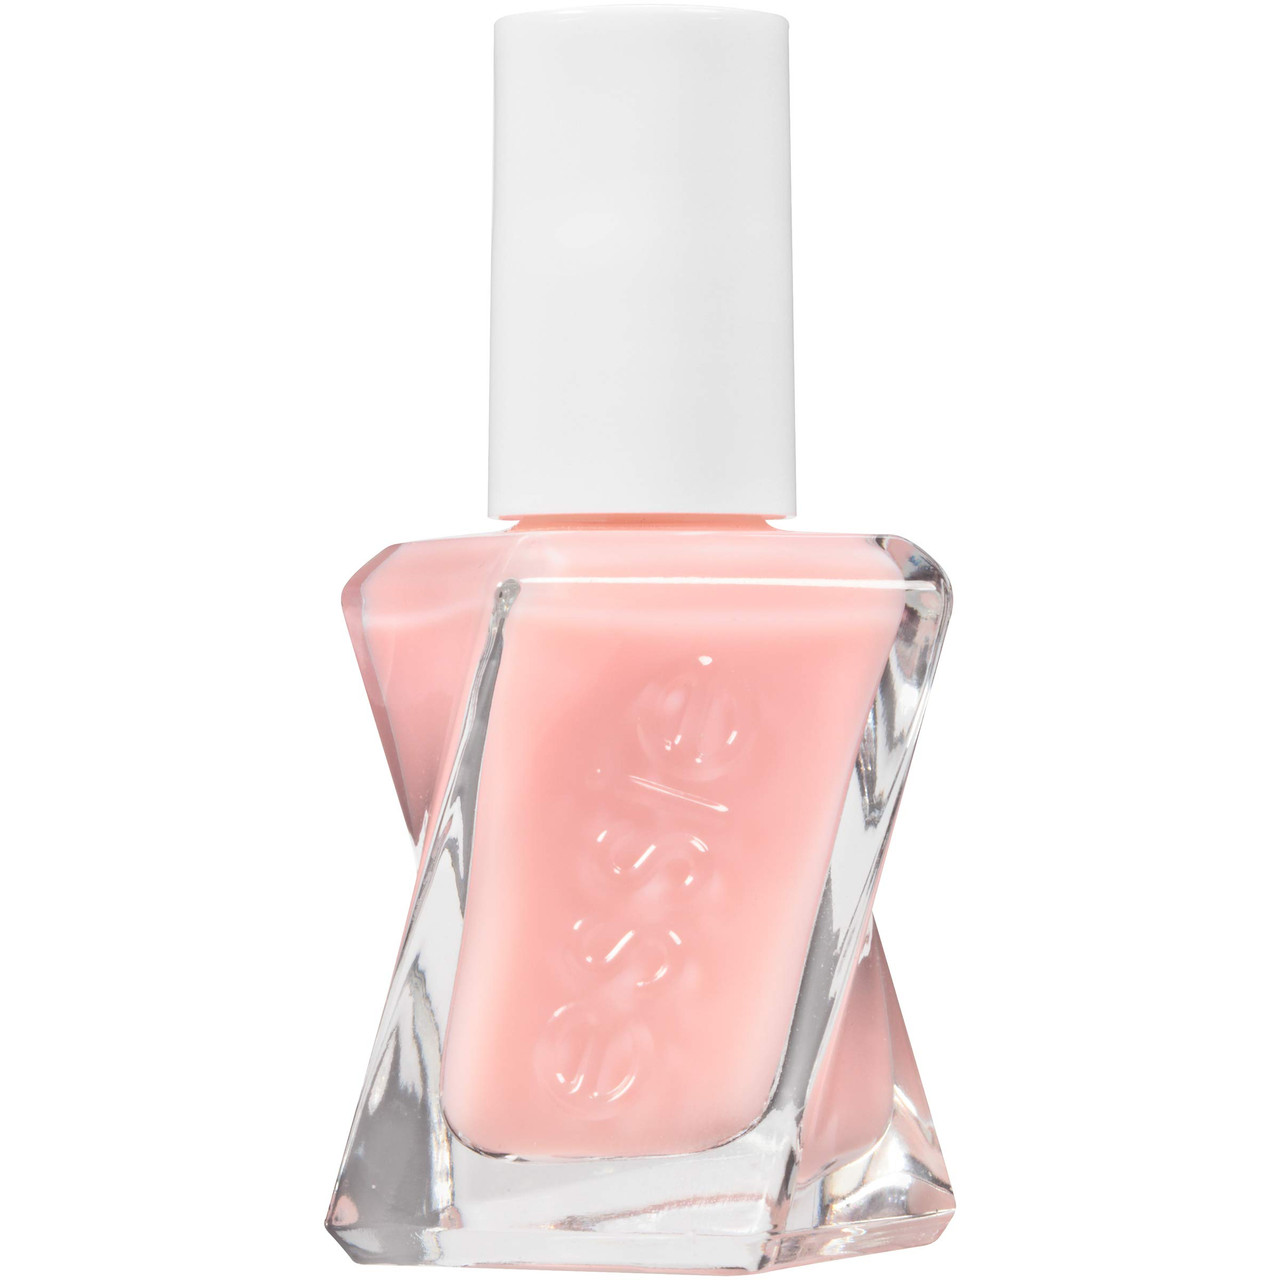 New Arrival Ins Style Sheer Nail Gel Polish, Easily Removable Creamy Light  Pink Color, 1 Bottle 15ml Perfect For Both Salon And Home Use | SHEIN USA